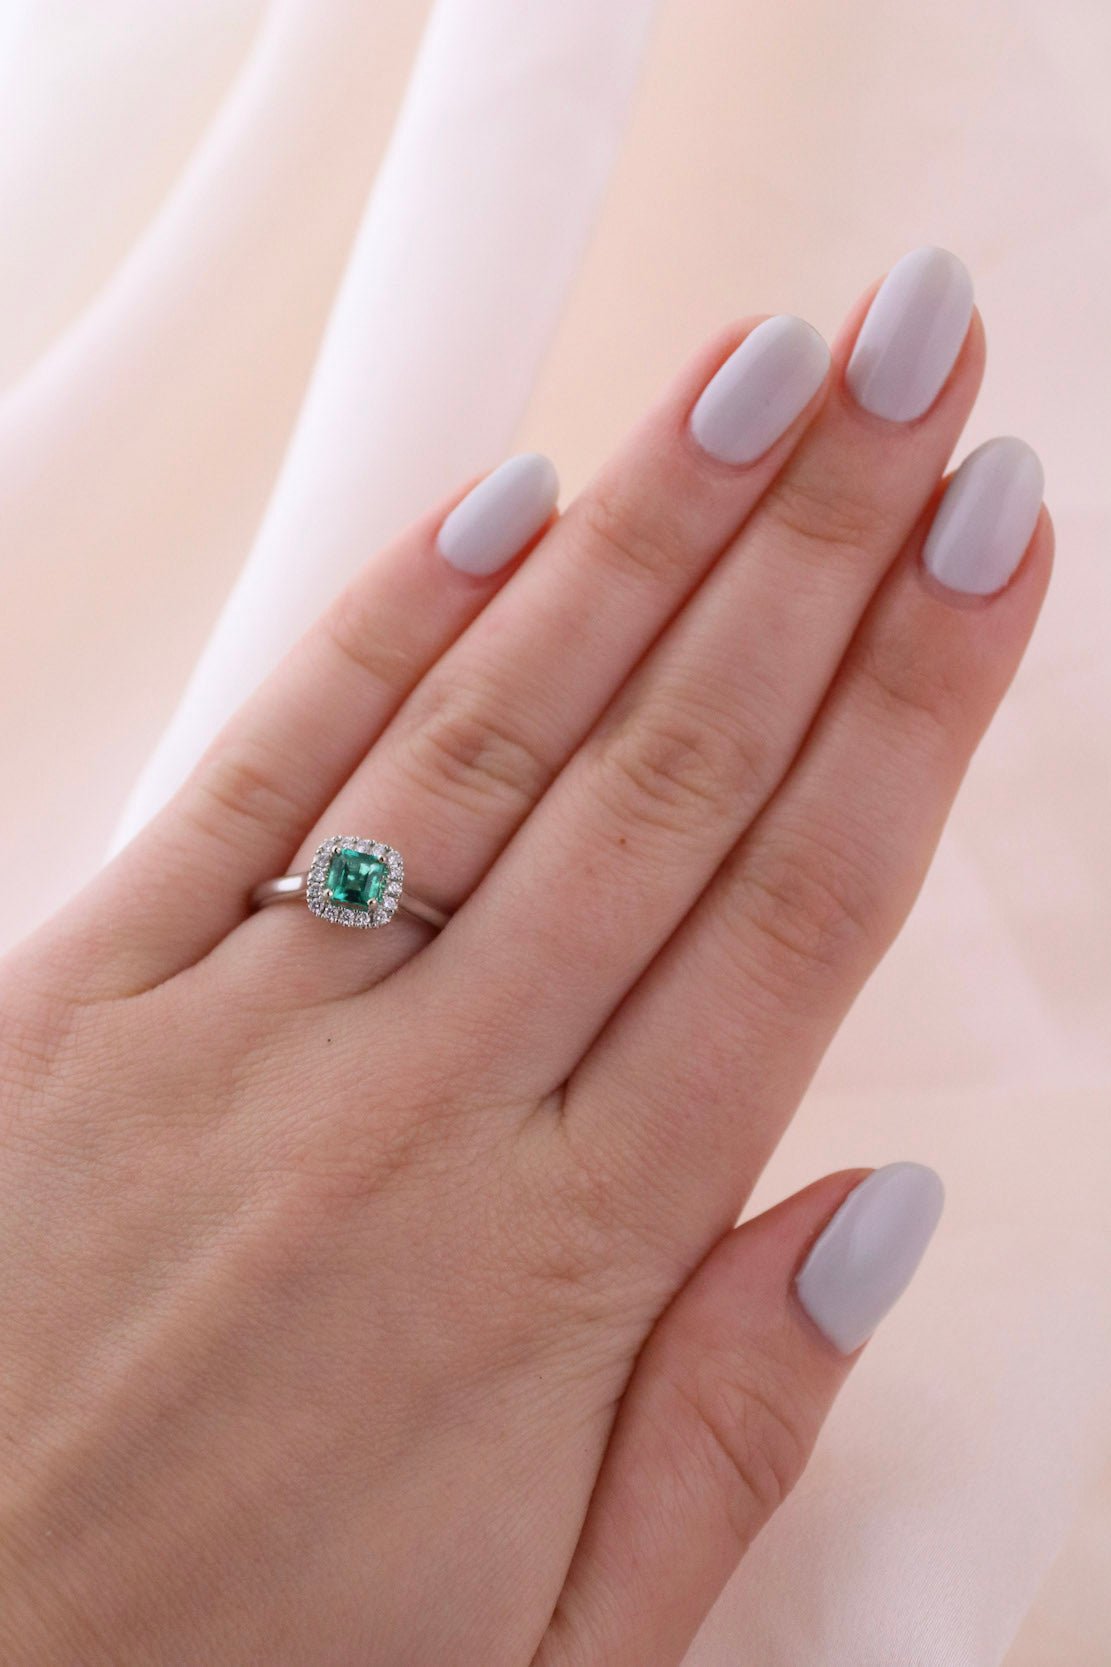 Load image into Gallery viewer, White Gold Emerald x Pave Diamond Ring - Kingdom Jewelry
